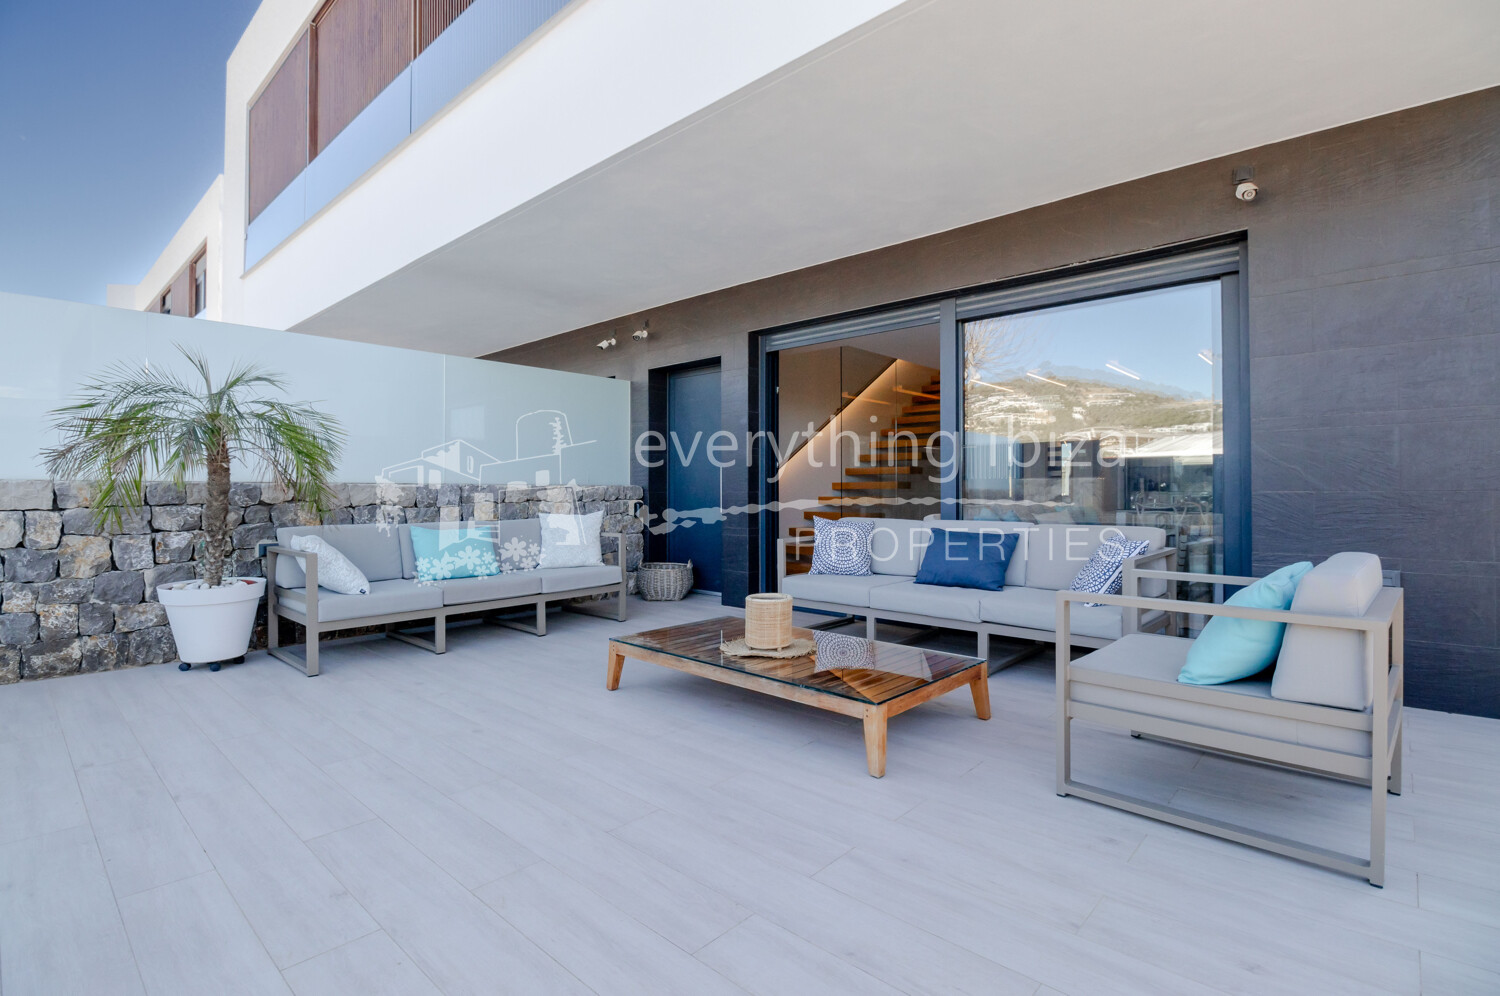 Stylish New Semi-Detached Villa with Pool Close to Ibiza Marina and Talamanca Beach, ref. 1653, for sale in Ibiza by everything ibiza Properties